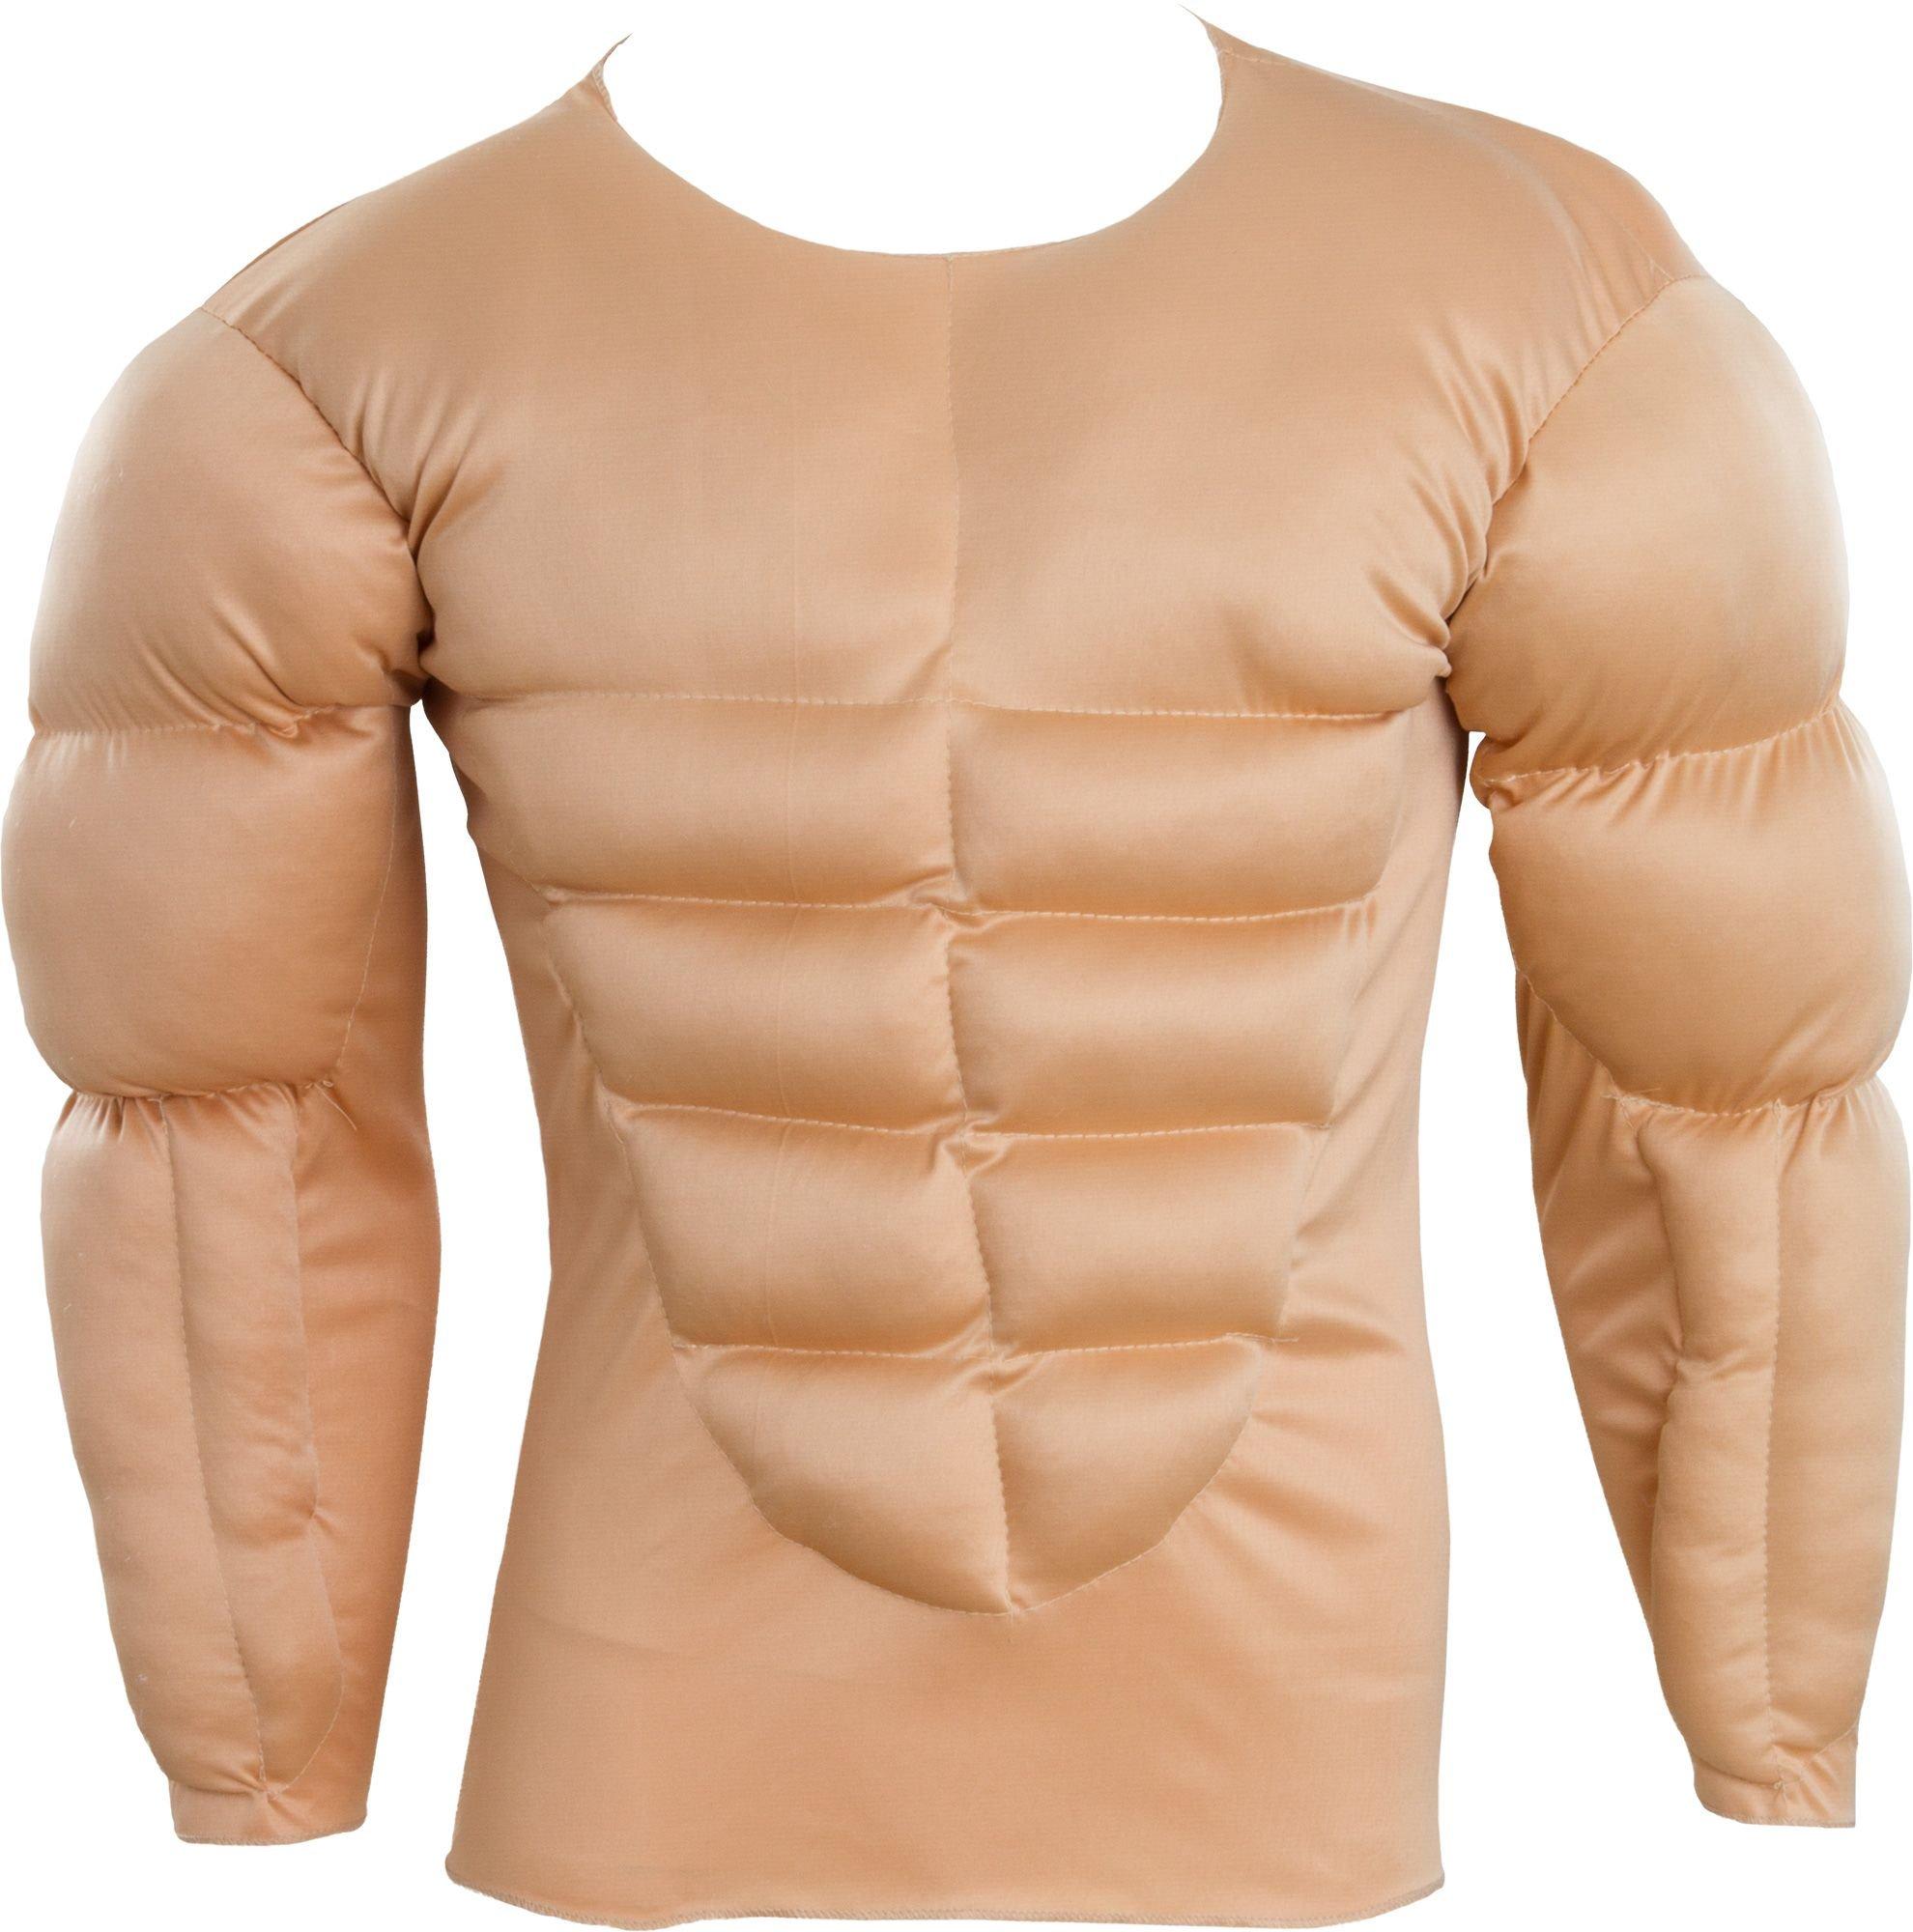 Muscle Shirt for Men | Party City